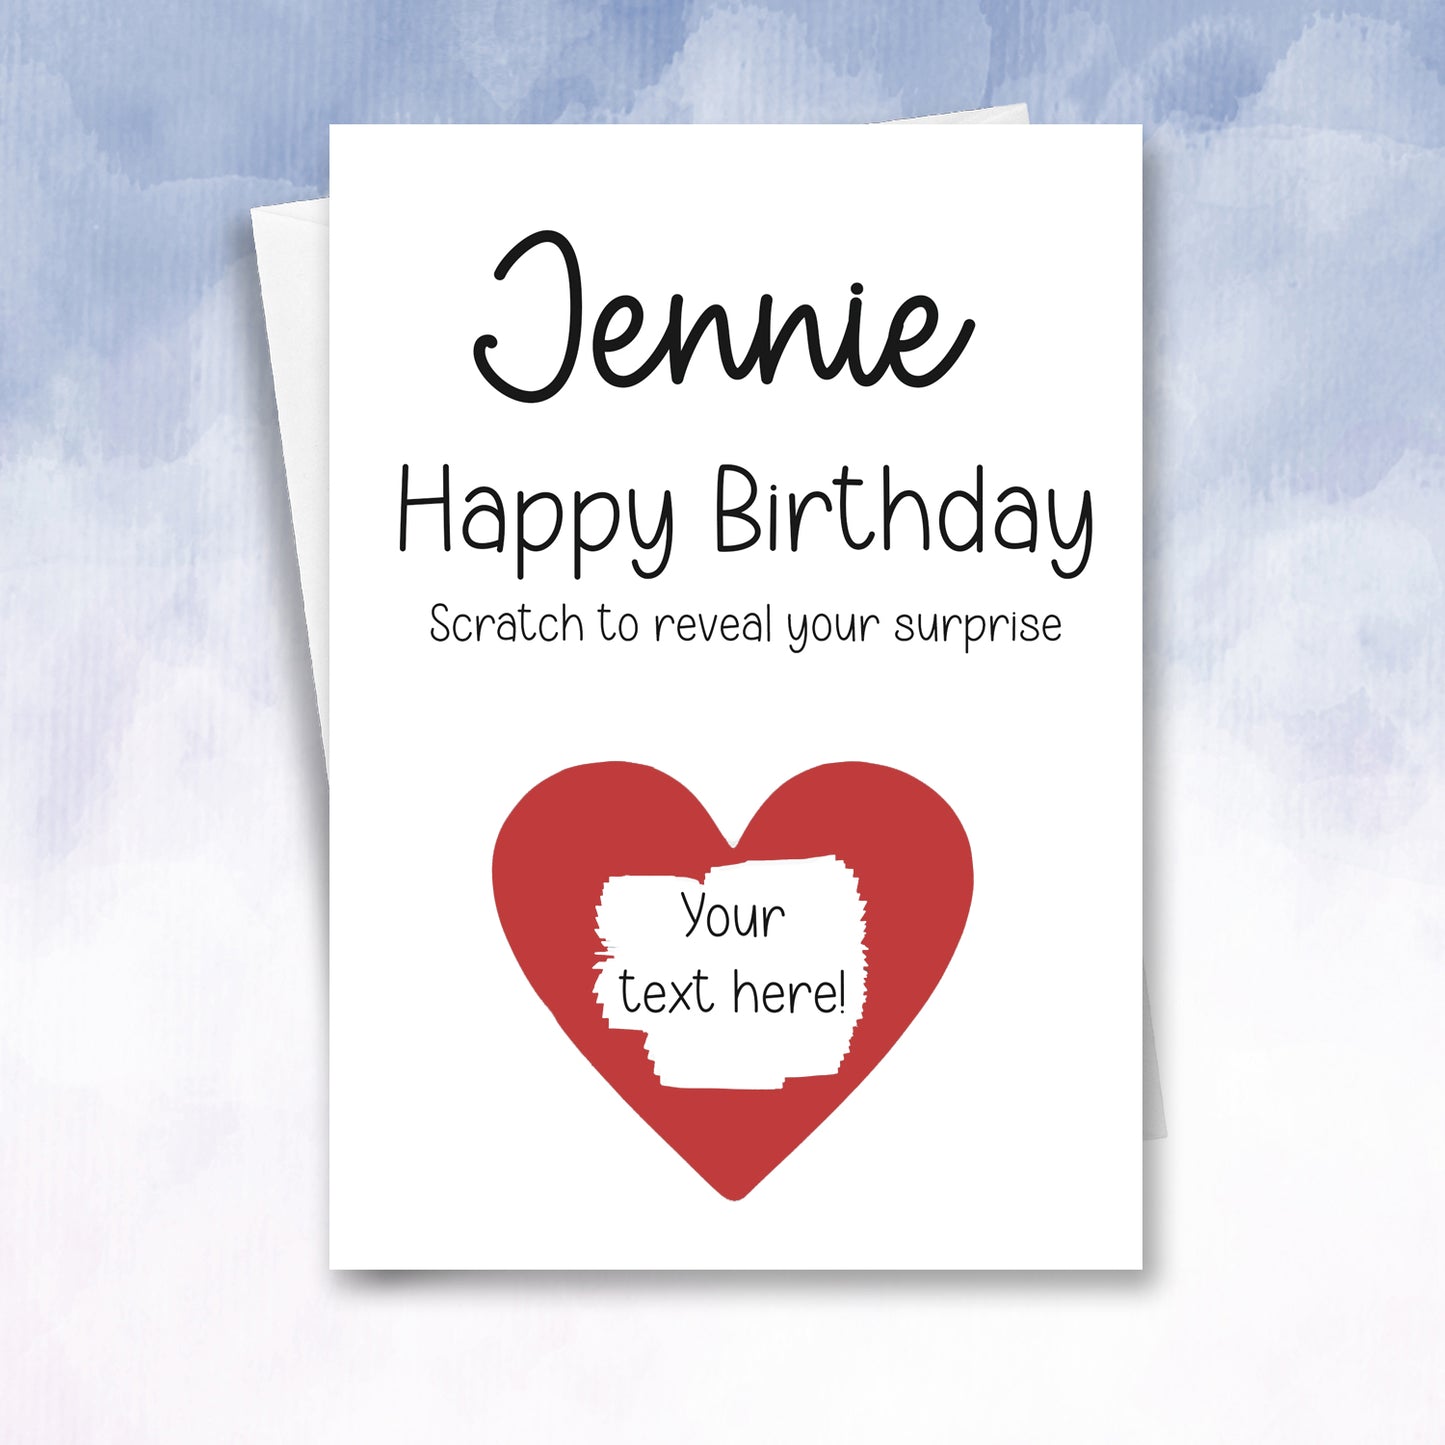 Personalised Scratch off Birthday Reveal Card - 2f75e5-2